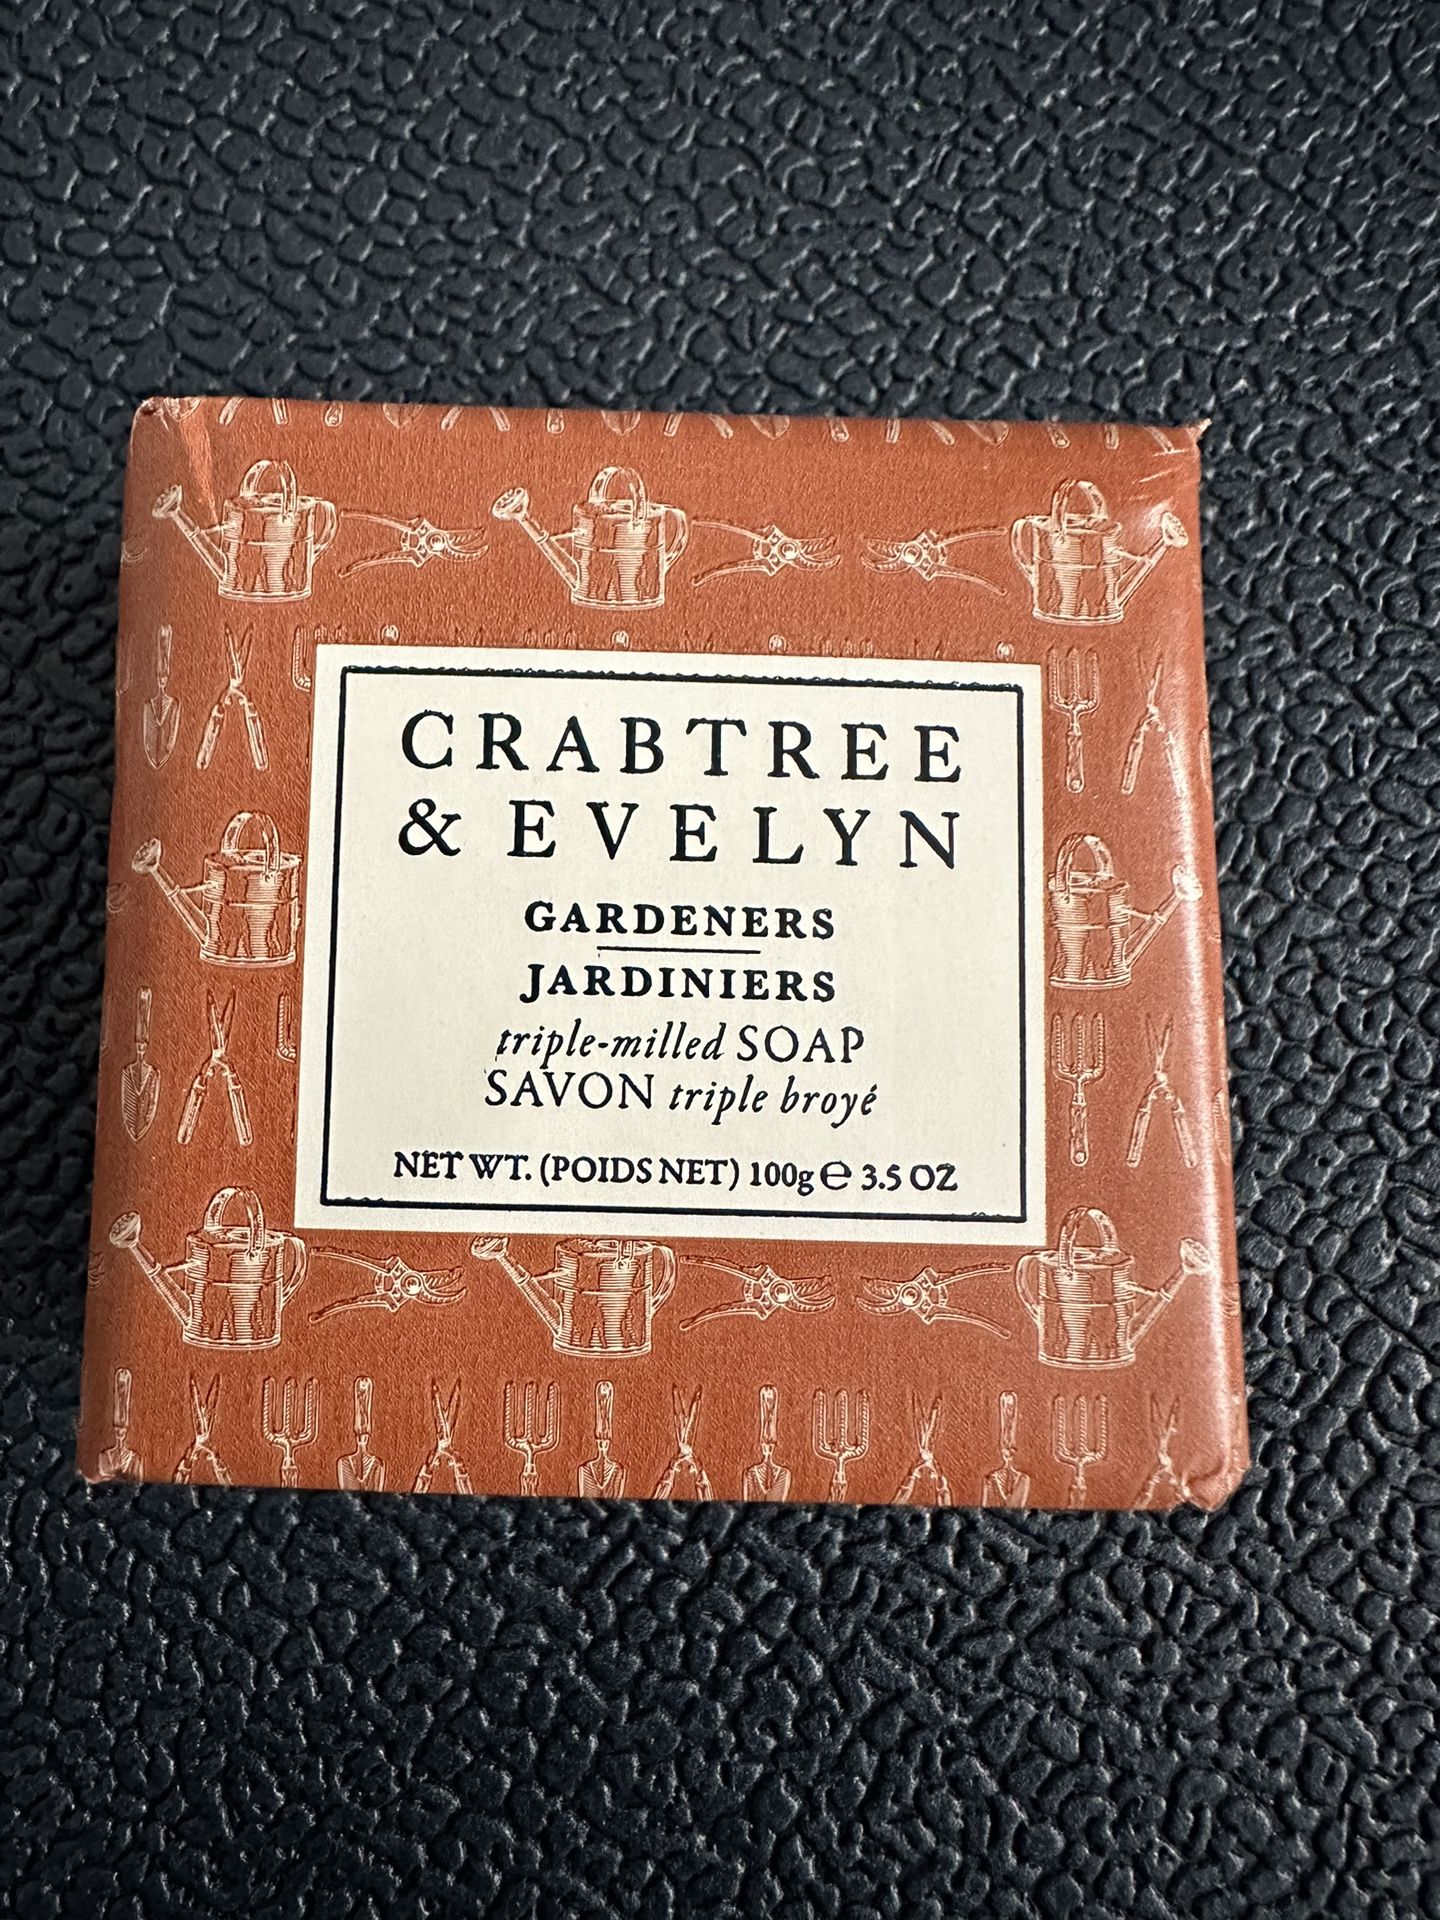 Crabtree & Evelyn Triple Milled Hand Soap 3.5oz - 2 Pack - Gardeners